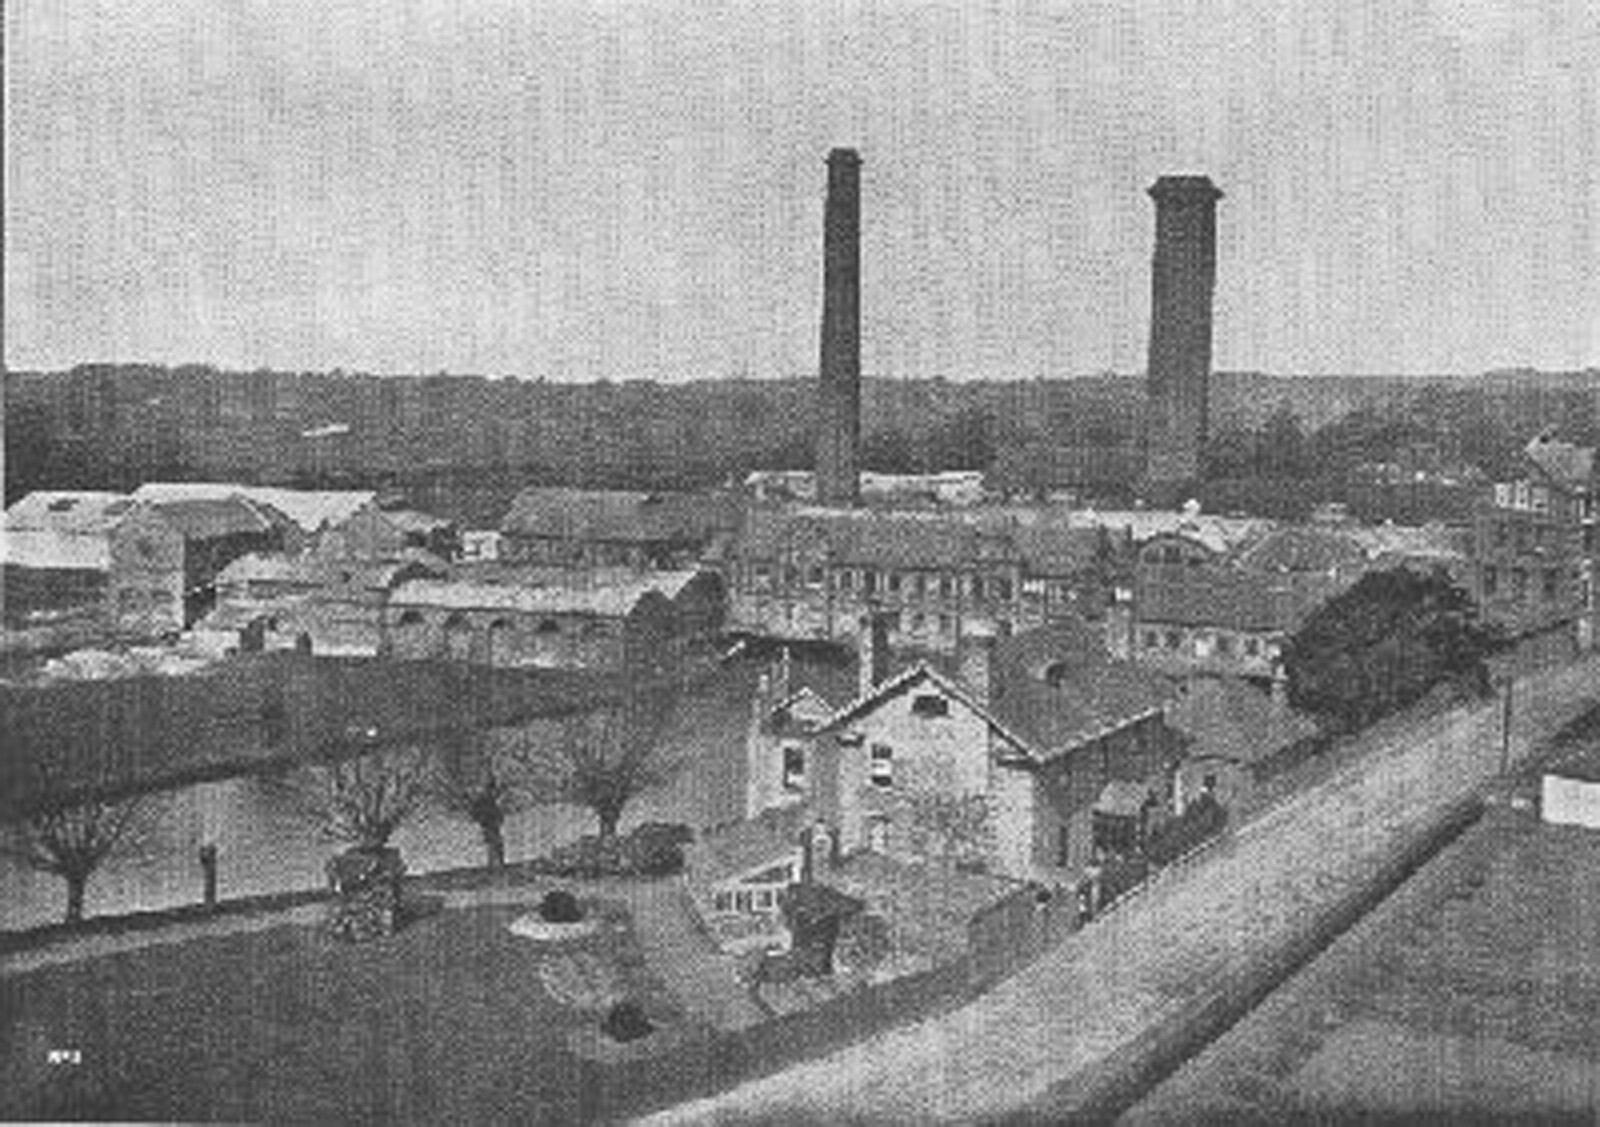 Horton Kirby Mill, South Darenth, Kent in 1872 